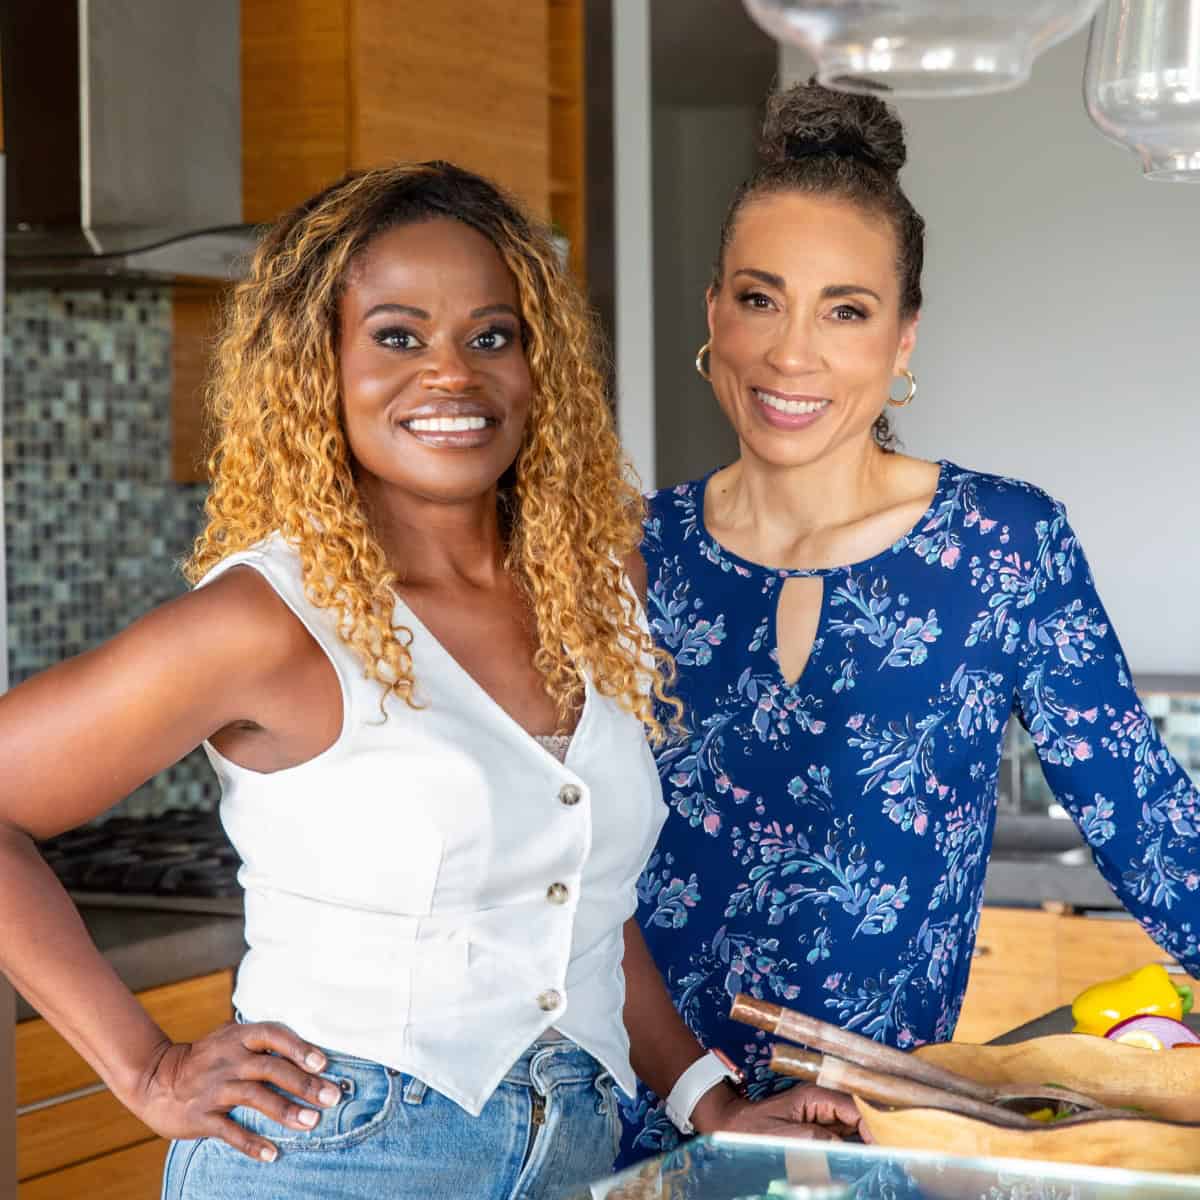 Two women standing in a kitchen smiling.